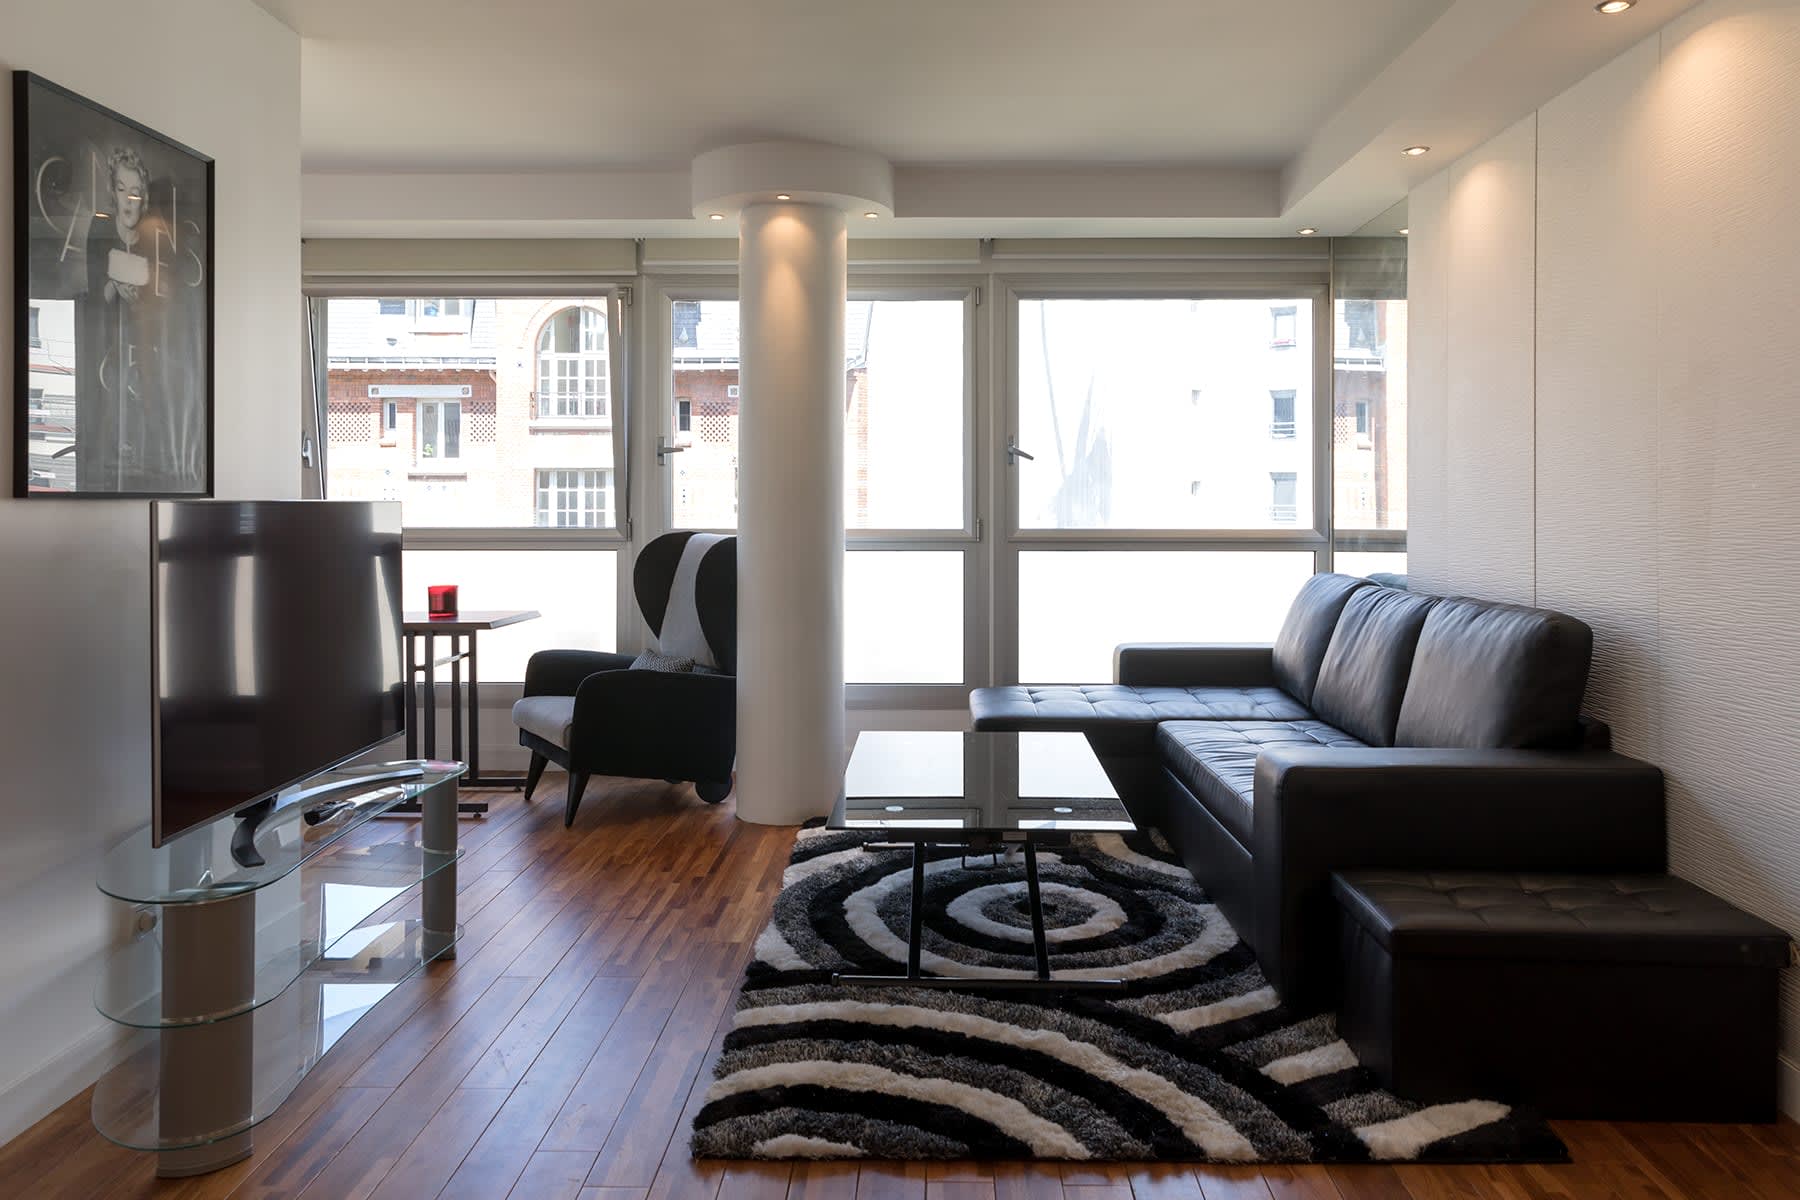 Property Image 1 - Beaugrenelle View | Modern 1 Bedroom Apartment in the 15th near Beaugrenelle